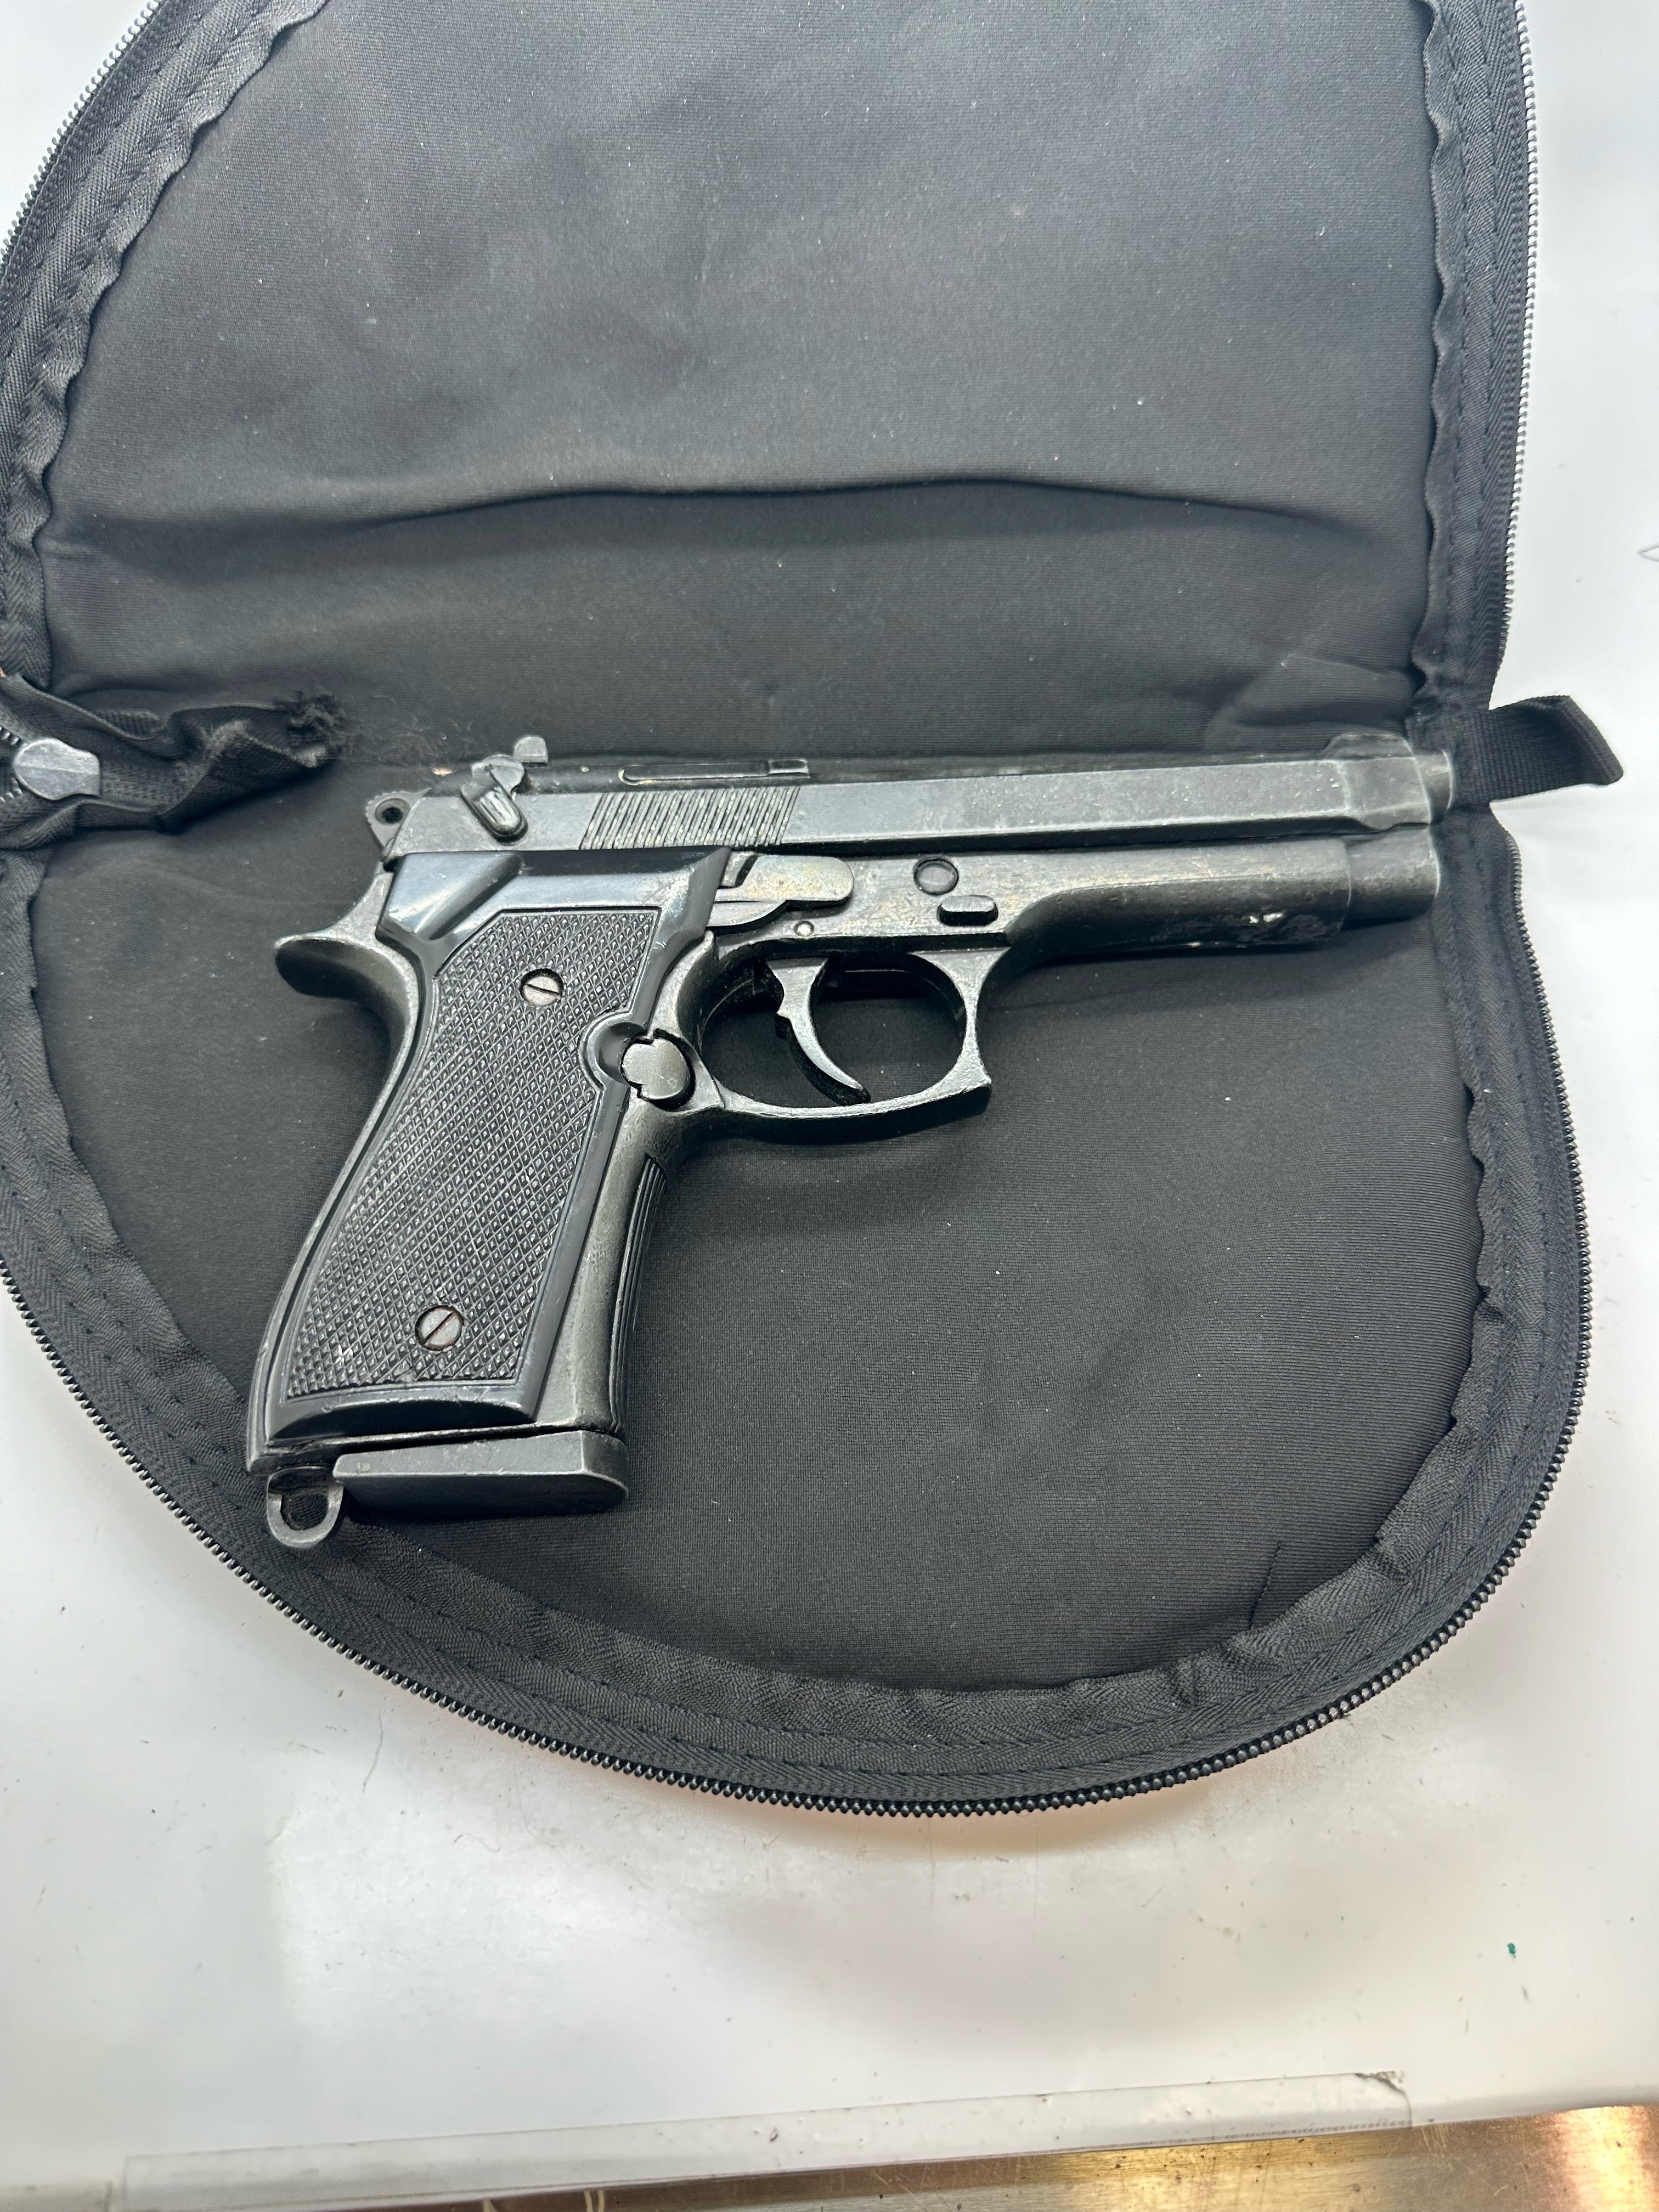 M92 Beretta 9mm handgun, military model replica, moving parts, in carry case. UK P&P Group 2 (£20+ - Image 2 of 3